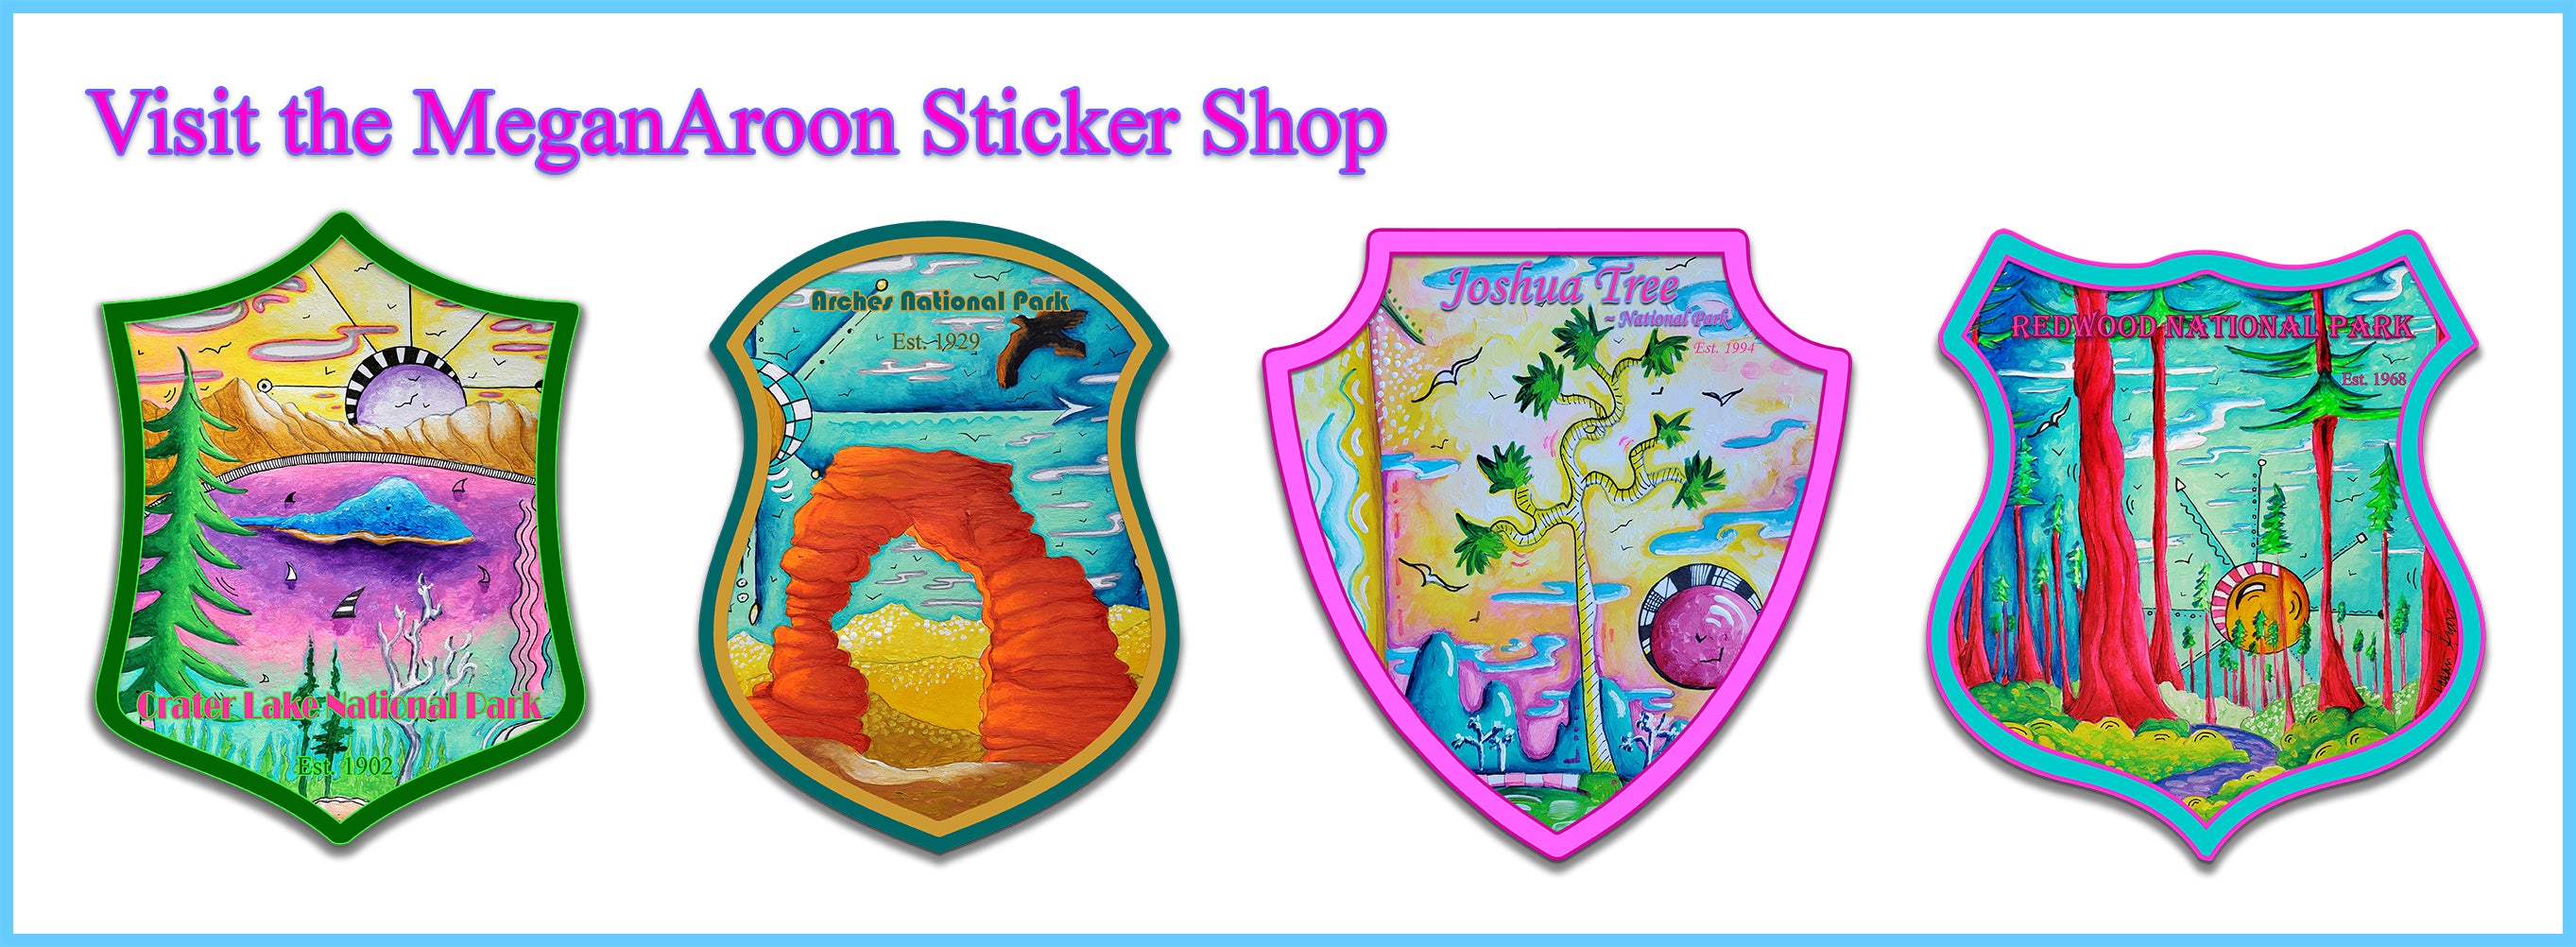 redbubble sticker shop of MeganAroon travel art from national parks to cityscapes